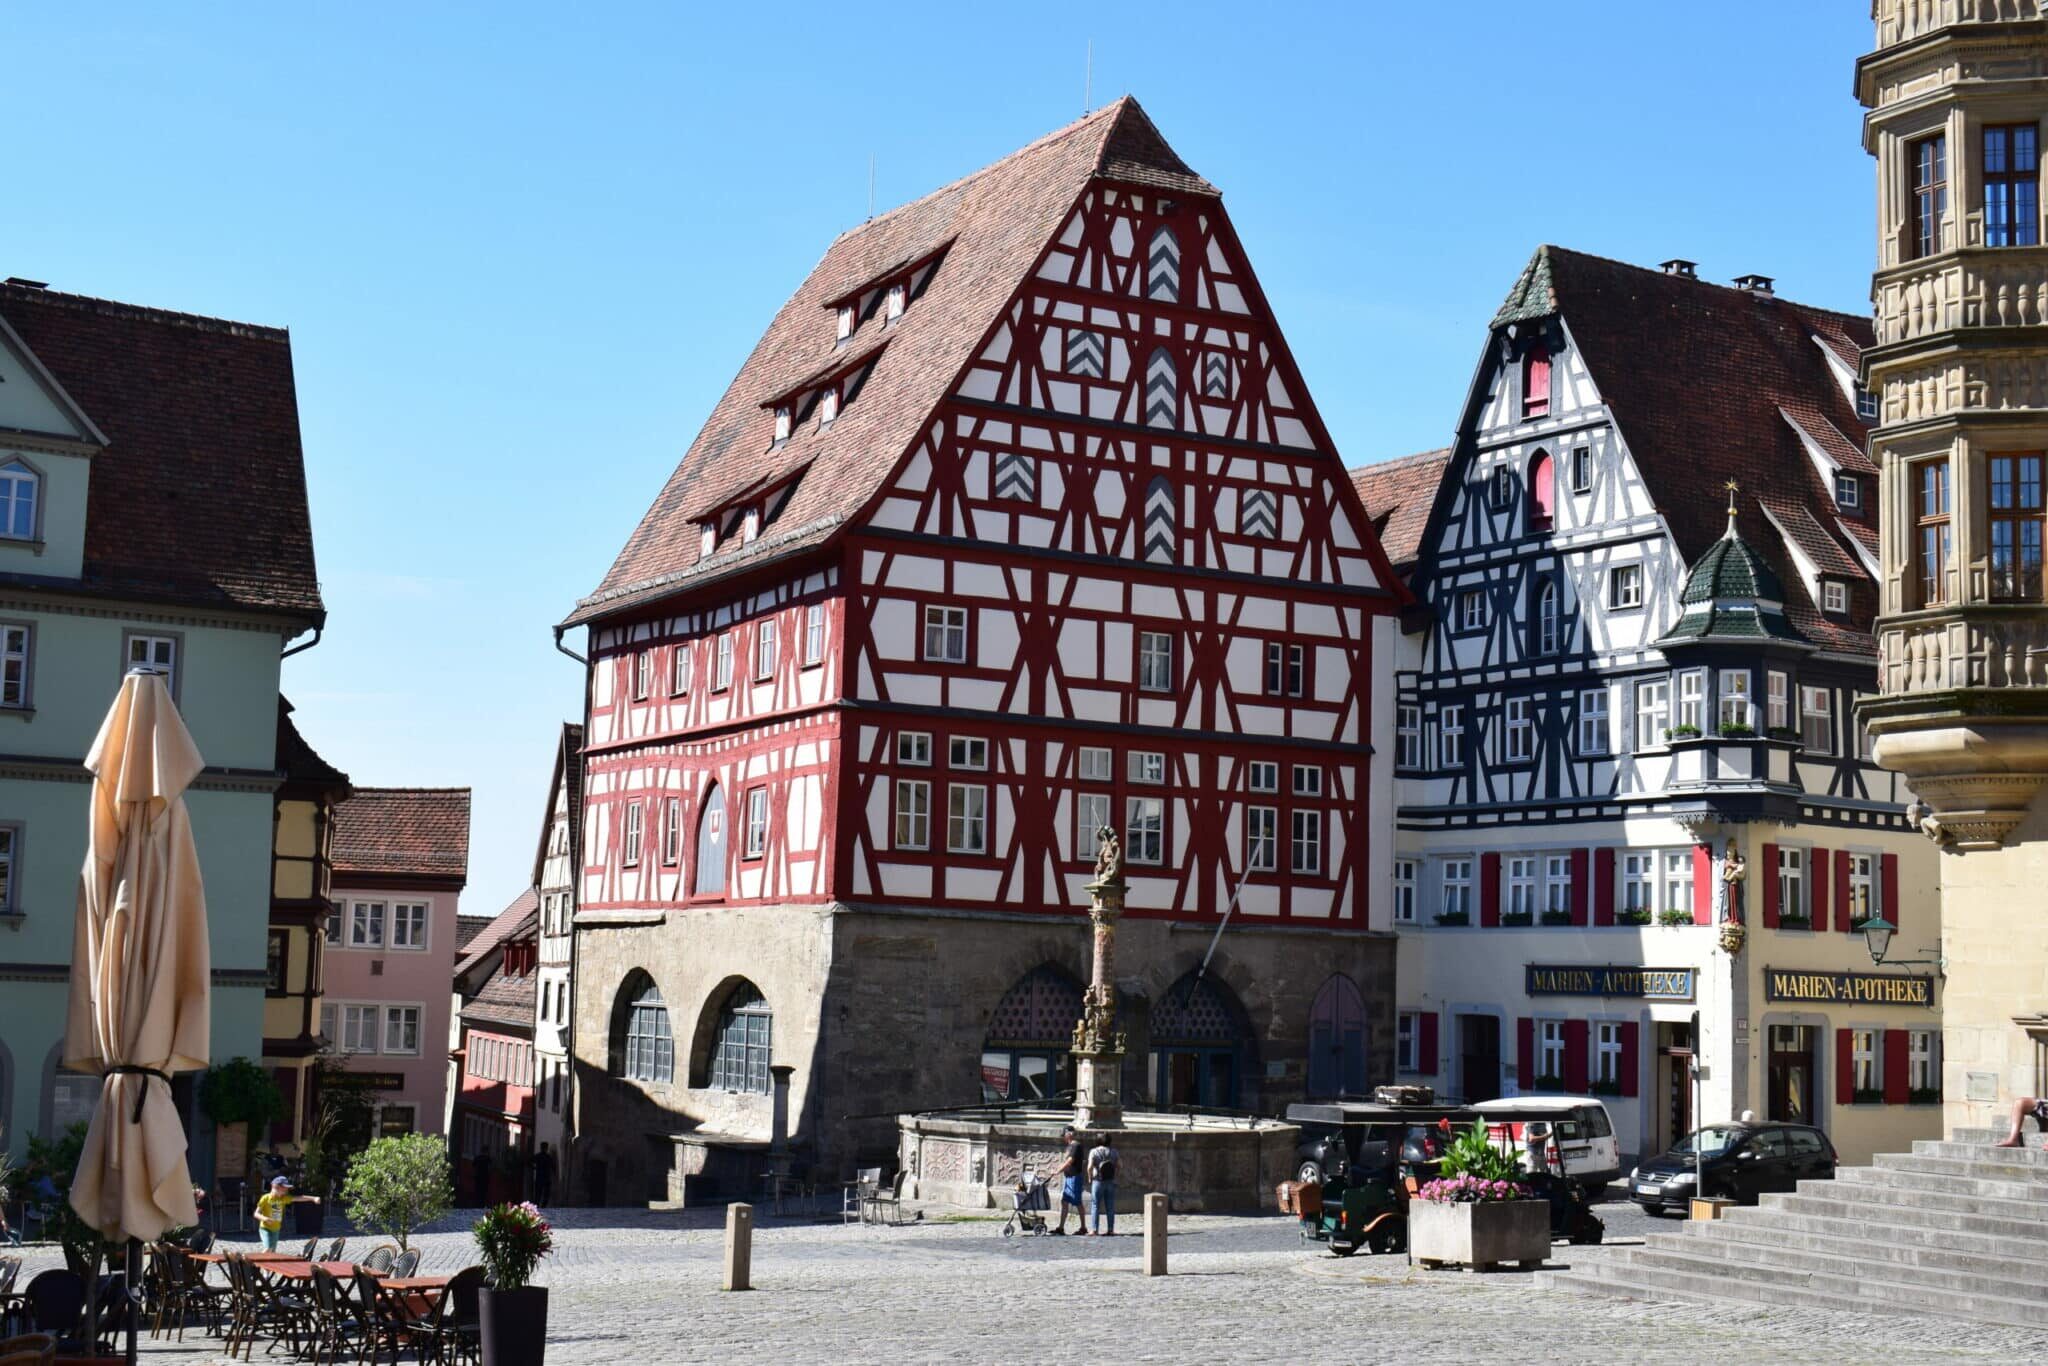 Travel Guide Rothenburg ob der Tauber – visit the most beautiful sights in only 3 hours